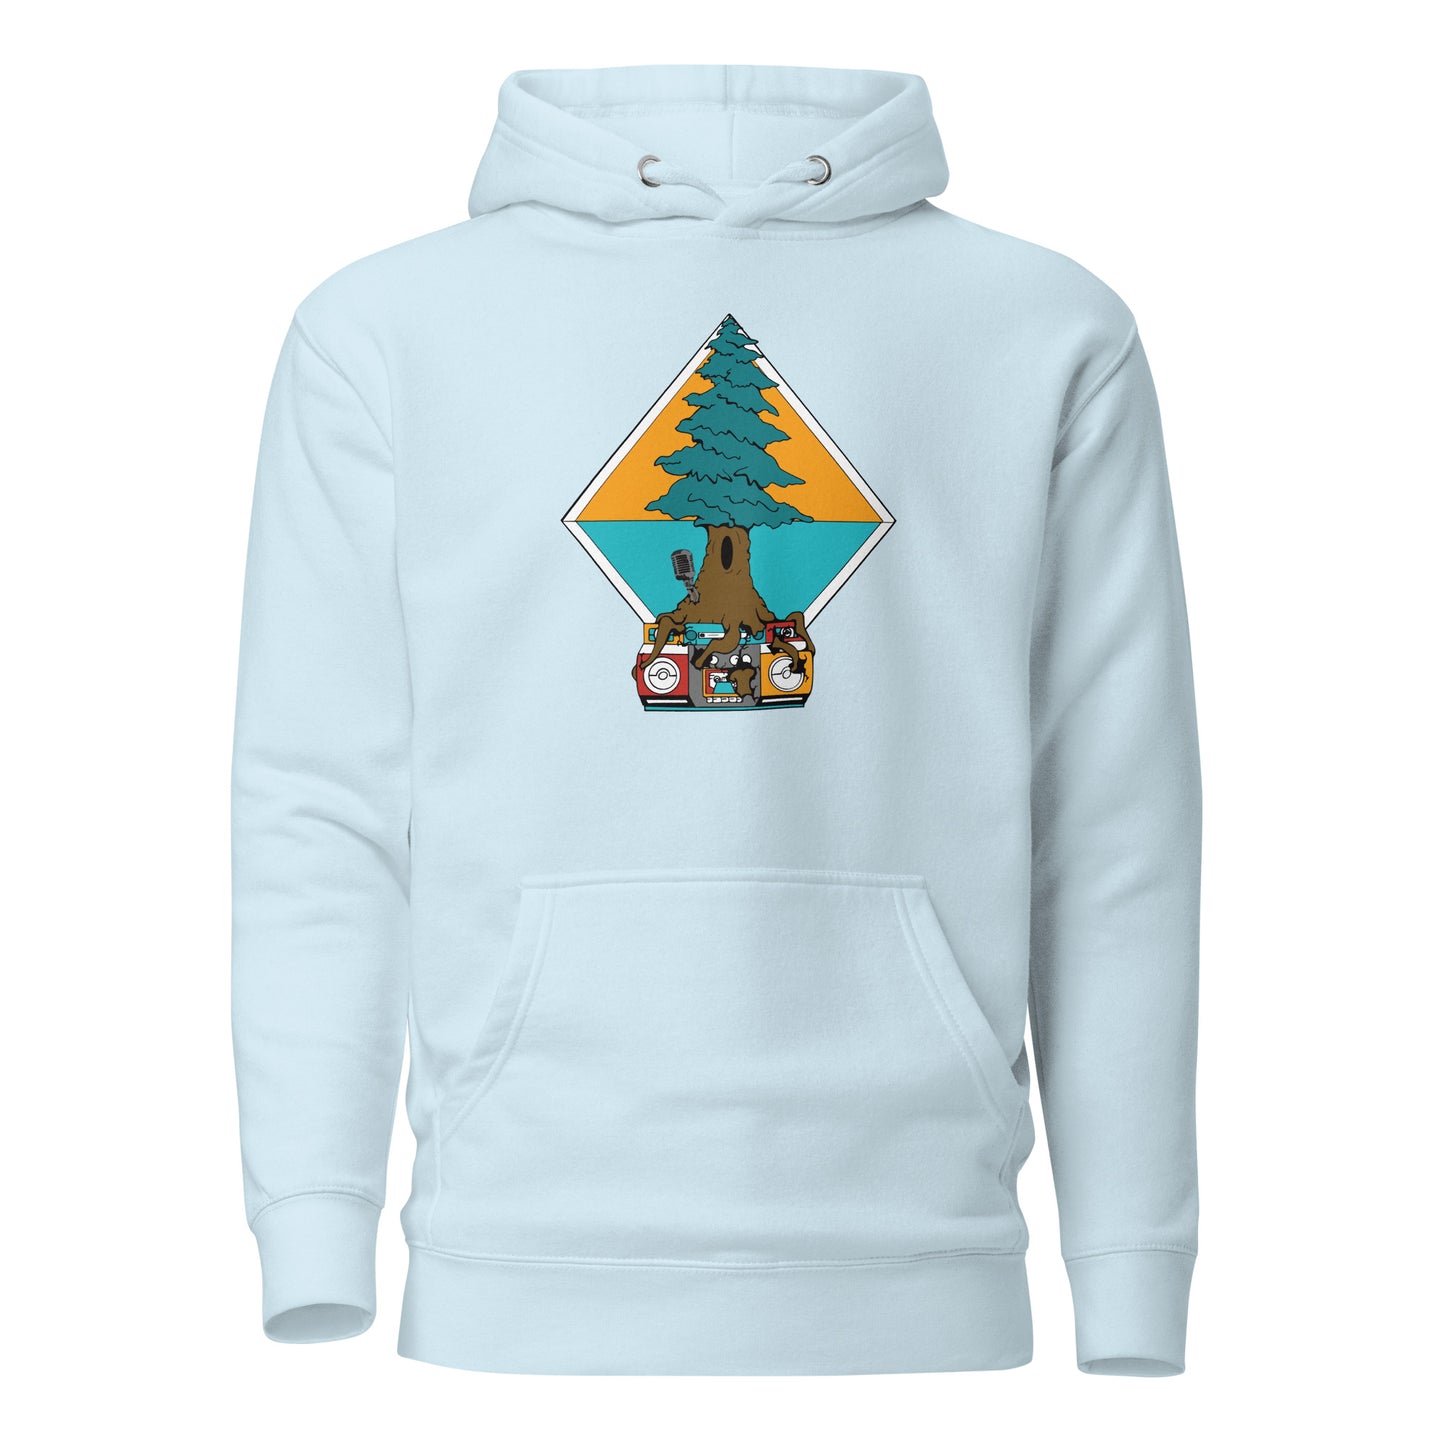 Hip Hop From the Woods Unisex Hoodie